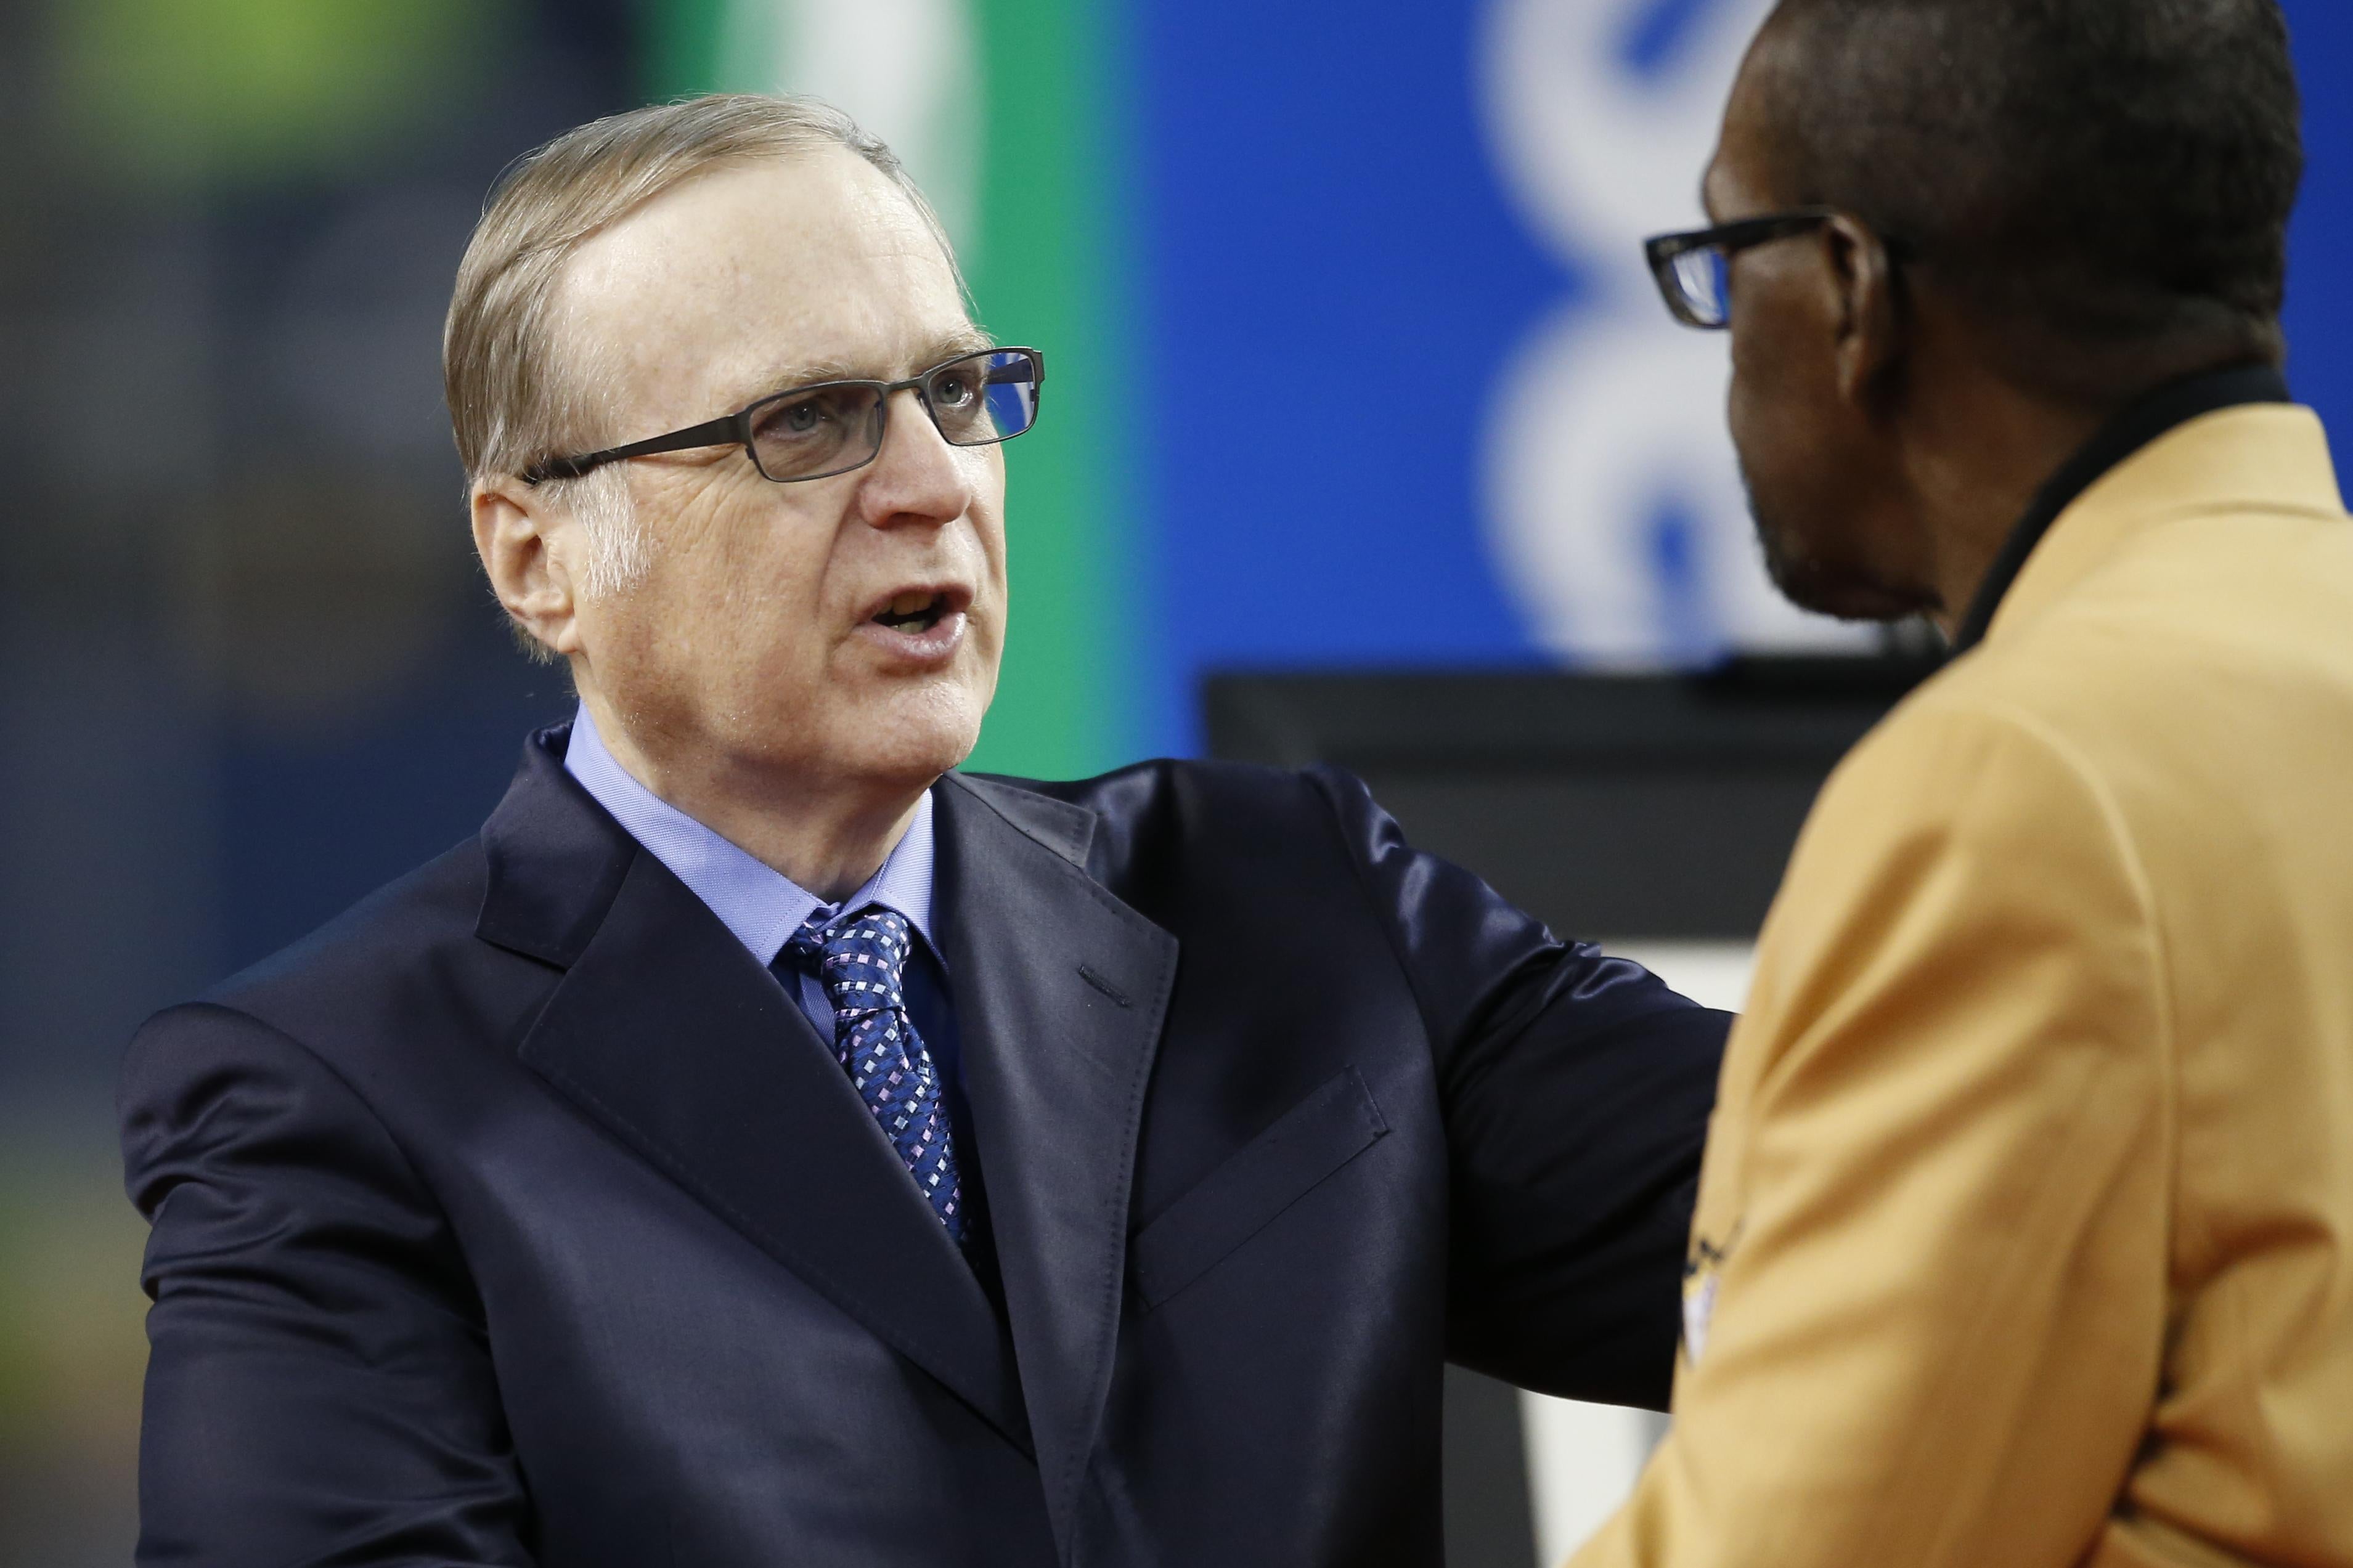 Paul Allen greets an NFL Hall of Fame member during halftime of a Seahawks game.